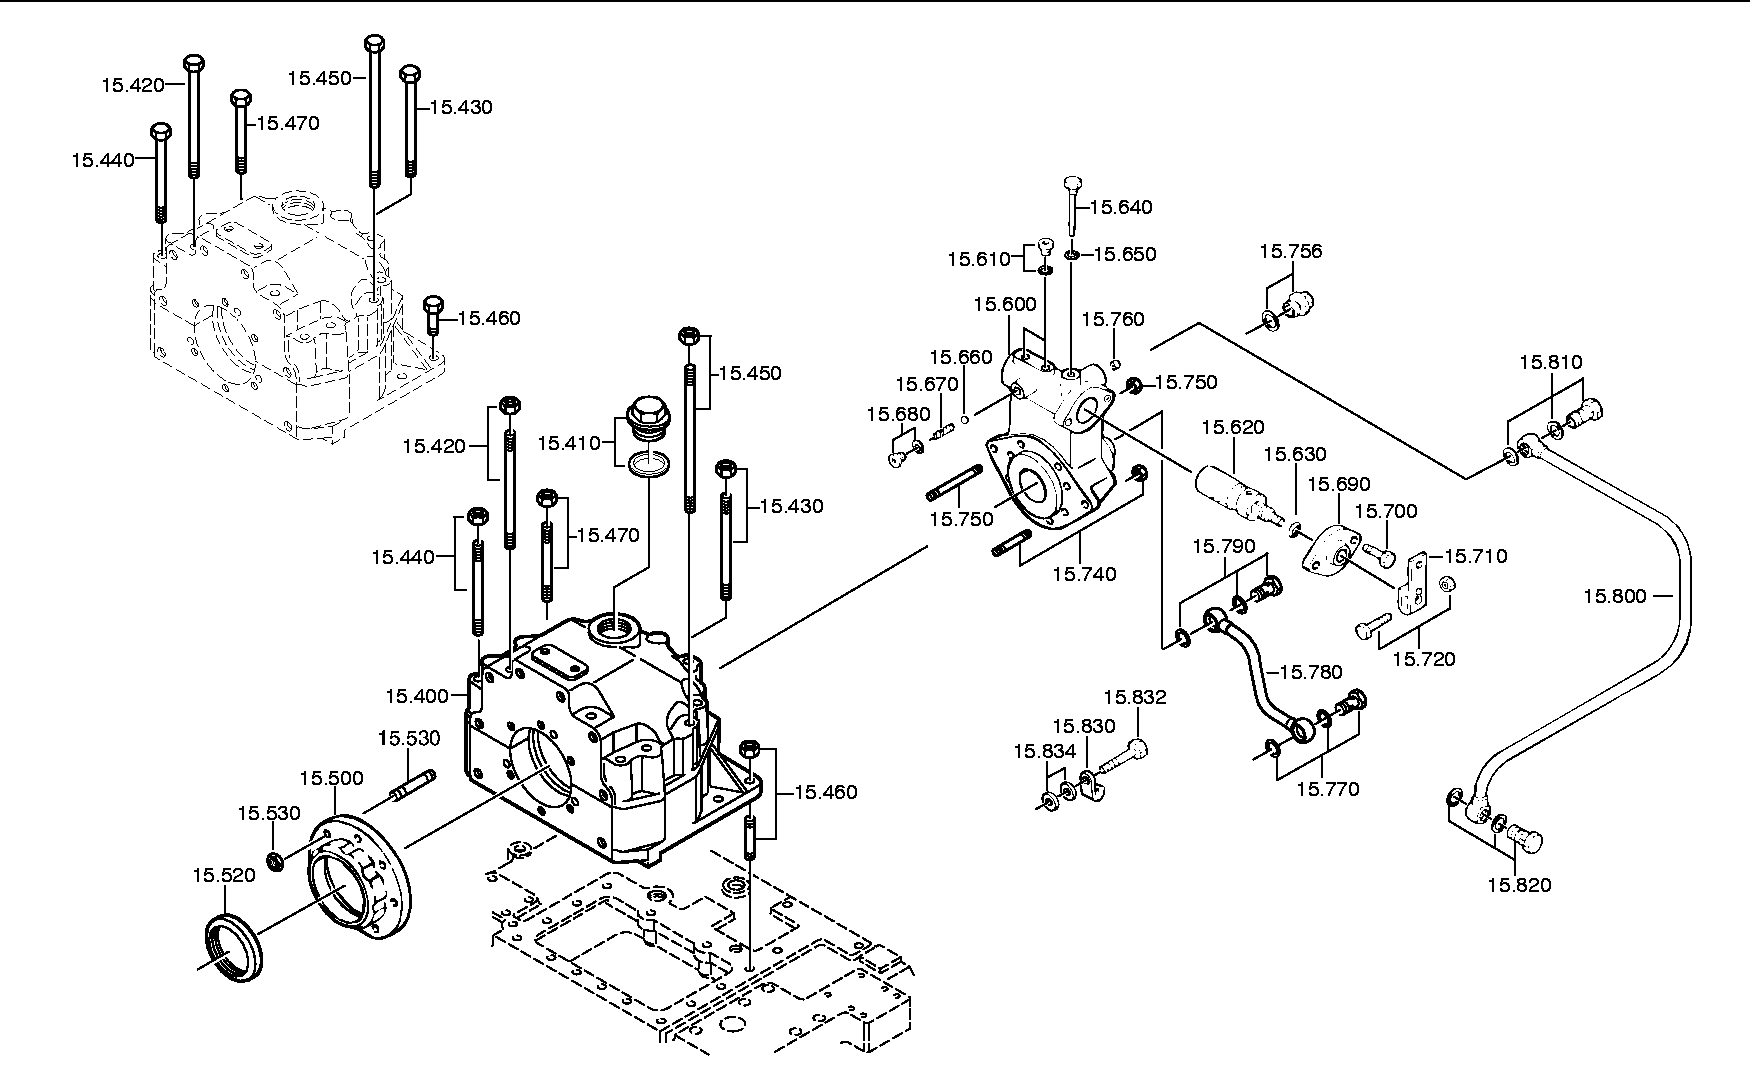 drawing for TEREX EQUIPMENT LIMITED 0012491 - CIRCLIP (figure 3)